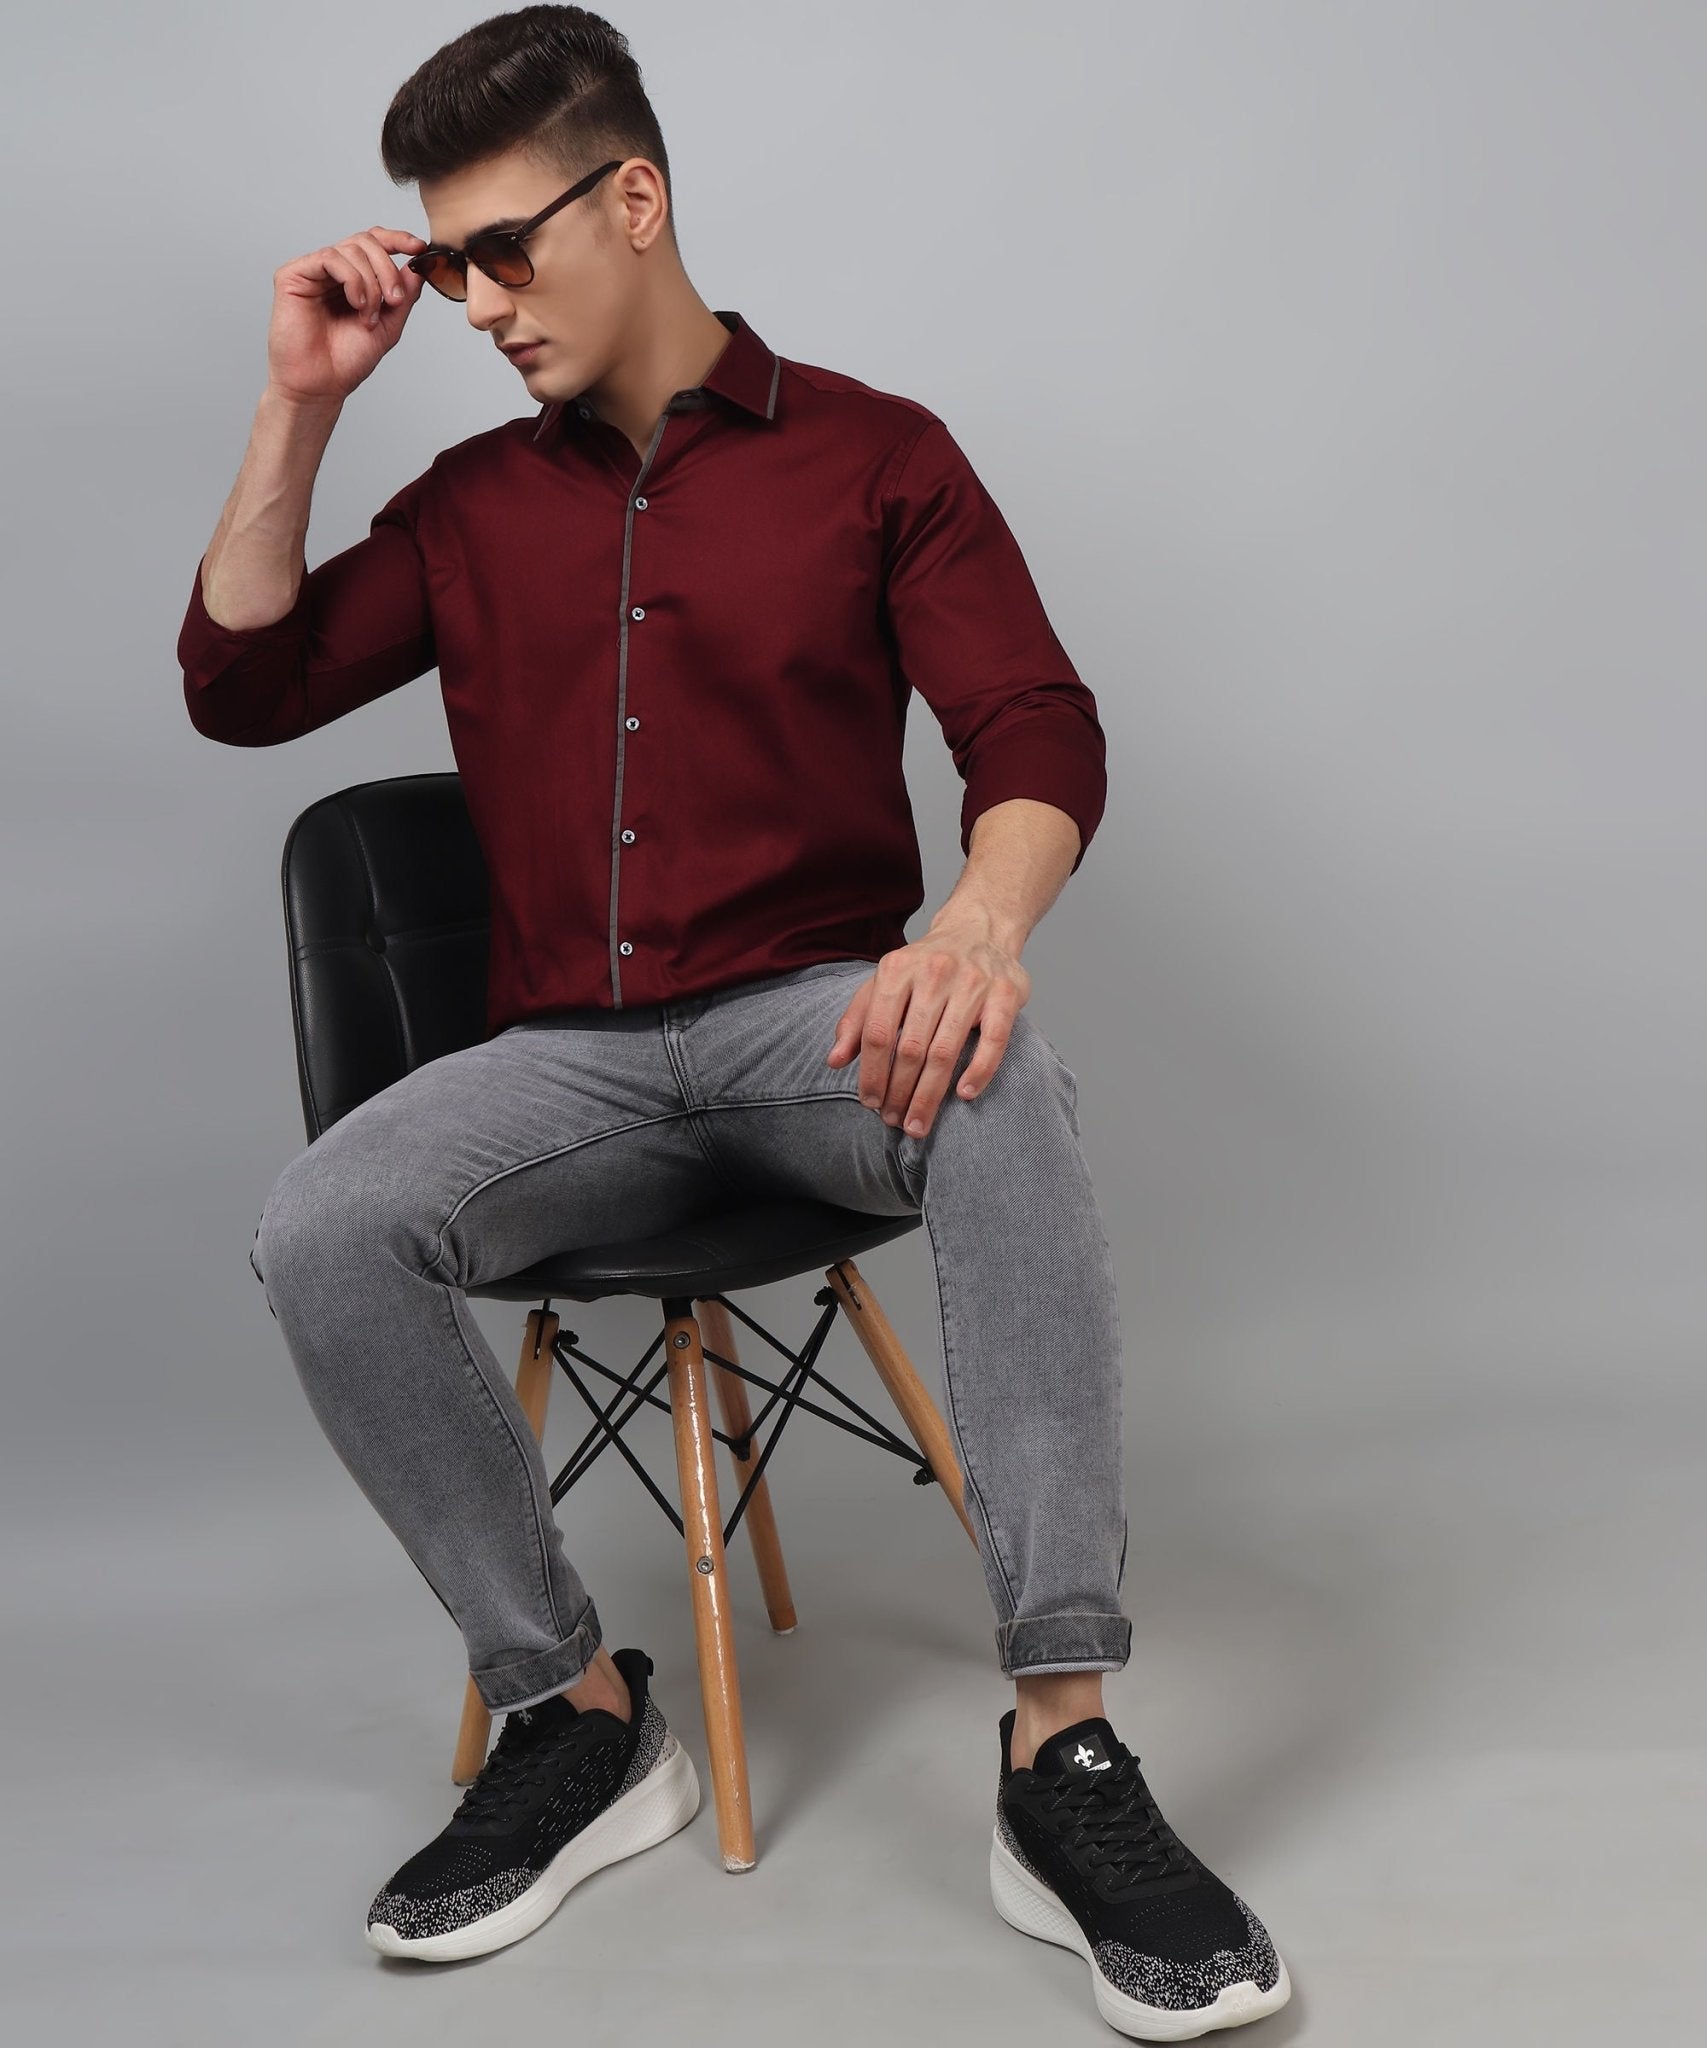 Luxurious Partywear TryBuy Premium WineRed Cotton Casual Solid Shirt for Men - TryBuy® USA🇺🇸